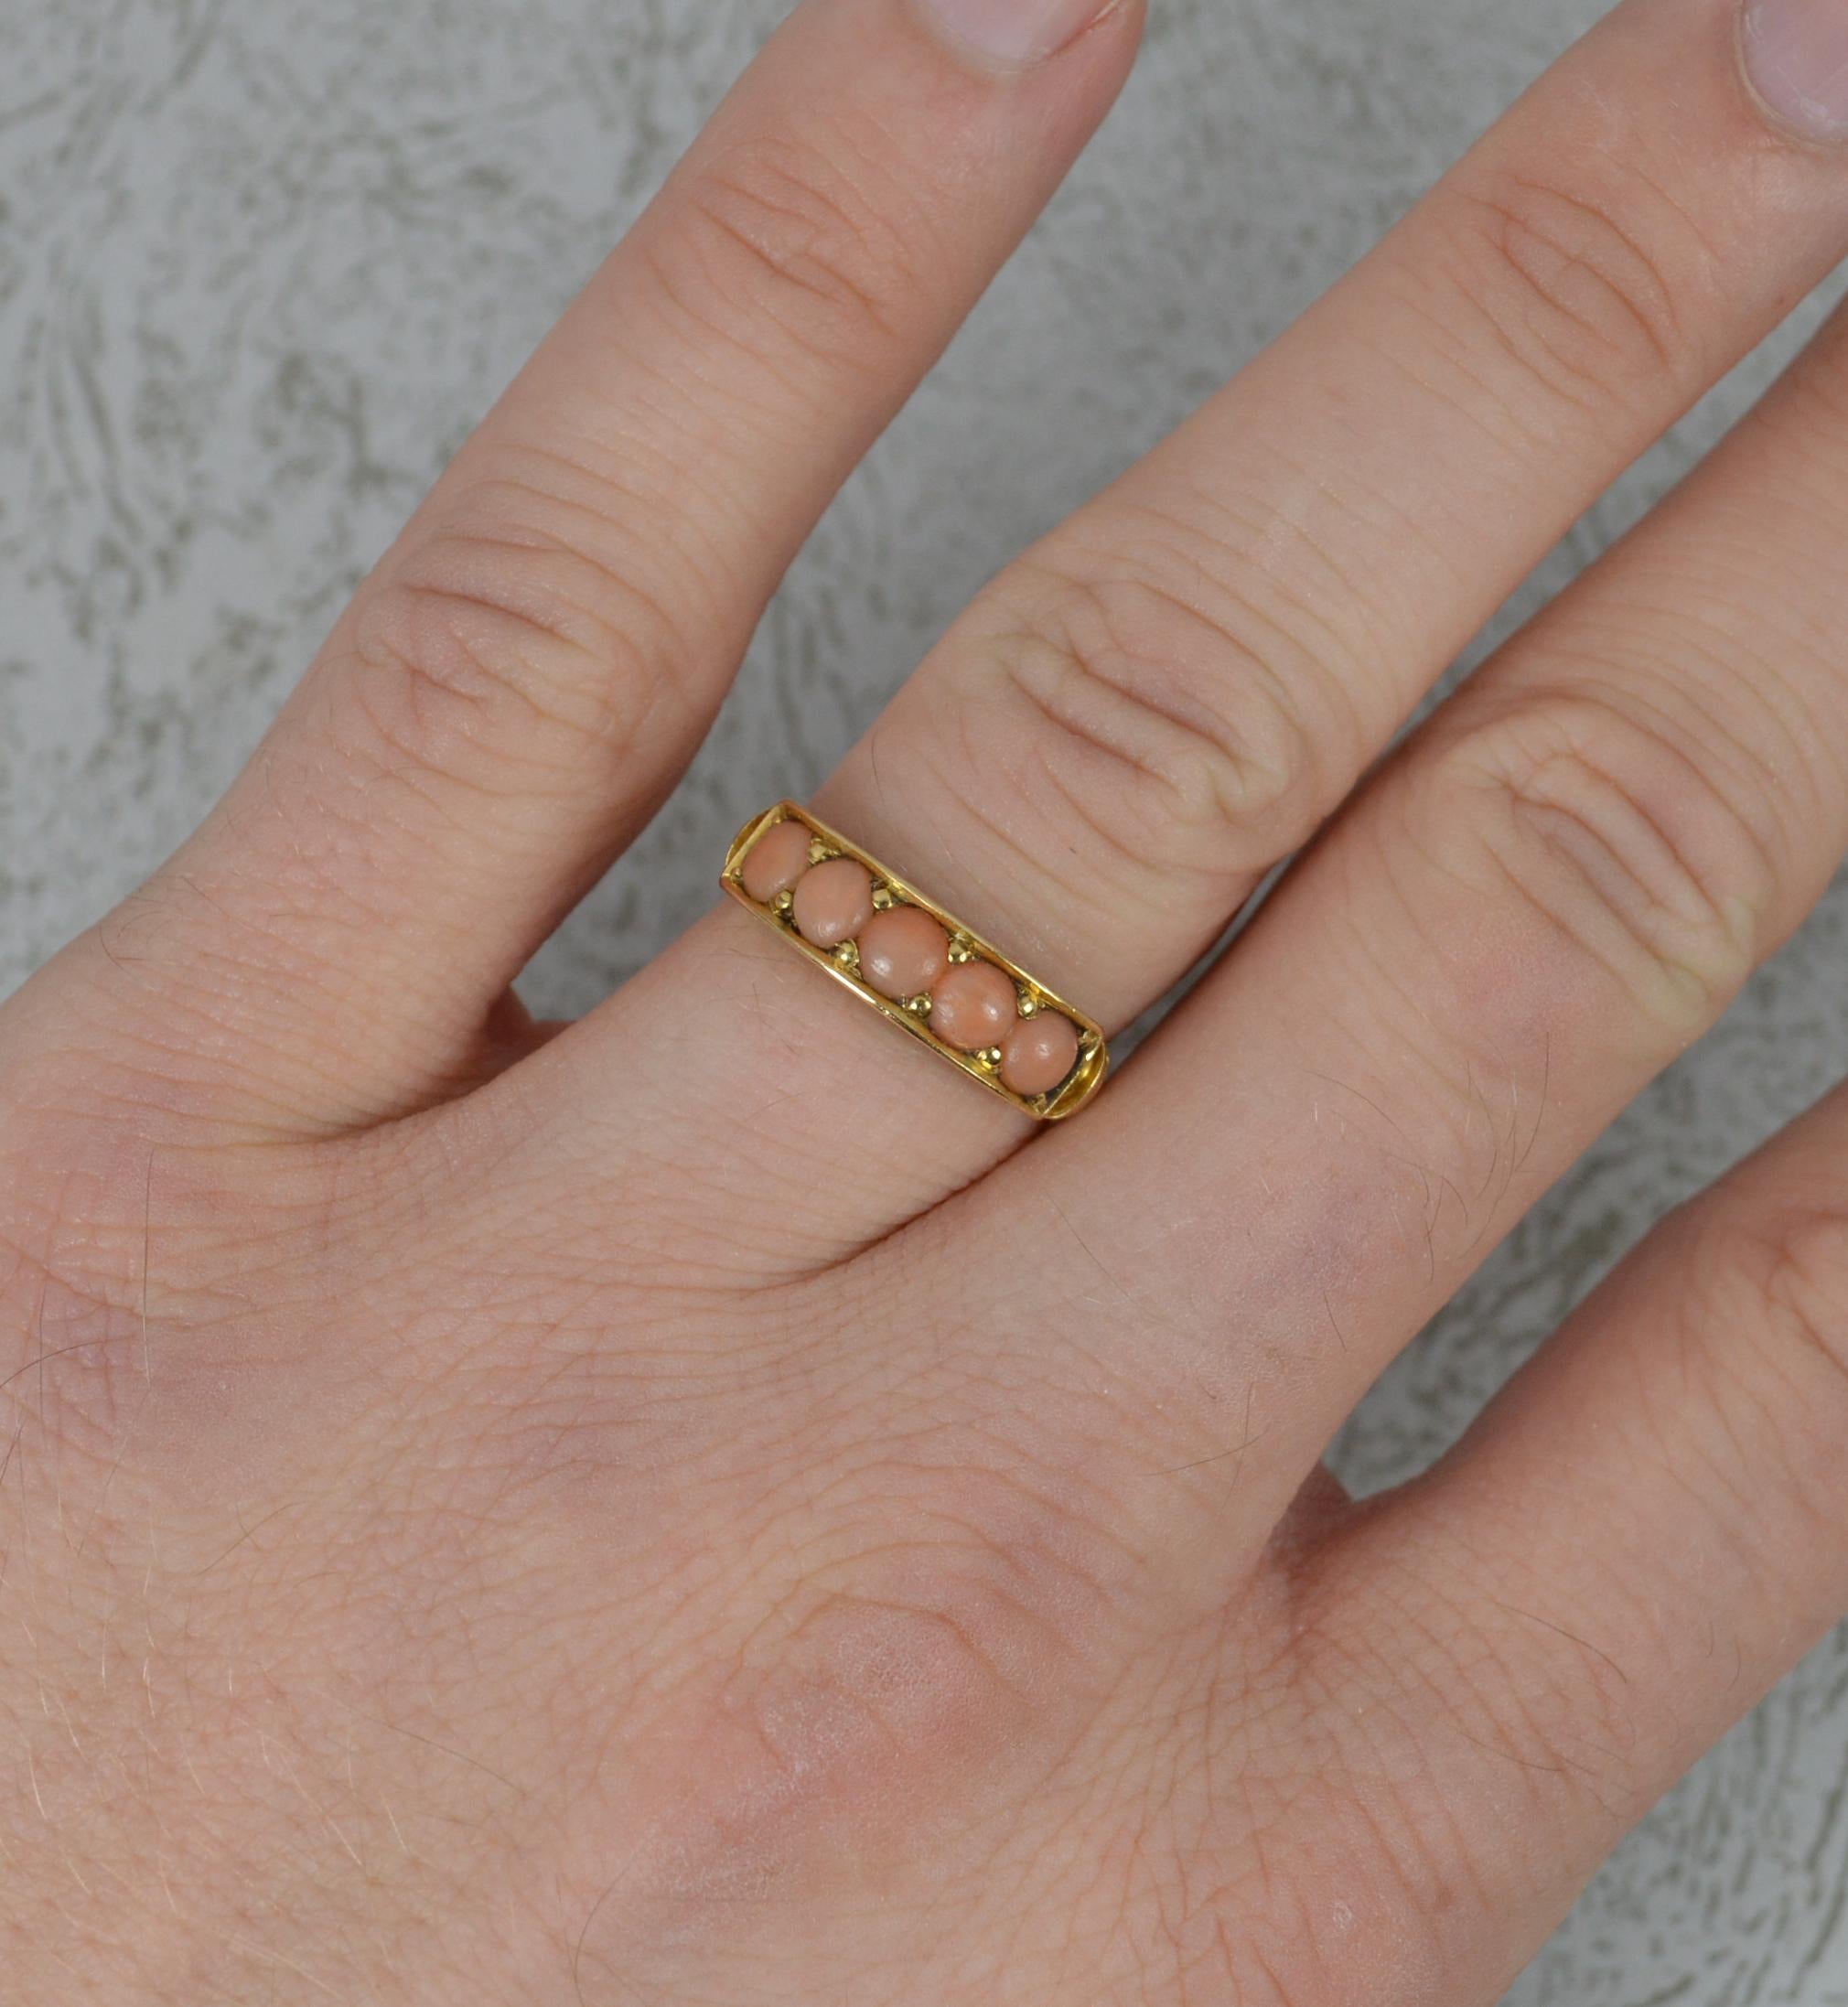 A superb Victorian period ring.
Solid 18 carat yellow gold example.
Set with five round shaped coral stones.
17mm spread of stones, 5.2mm wide band to front.

CONDITION ; Good for age. Clean and solid band. Securely set stones. Light wear only.